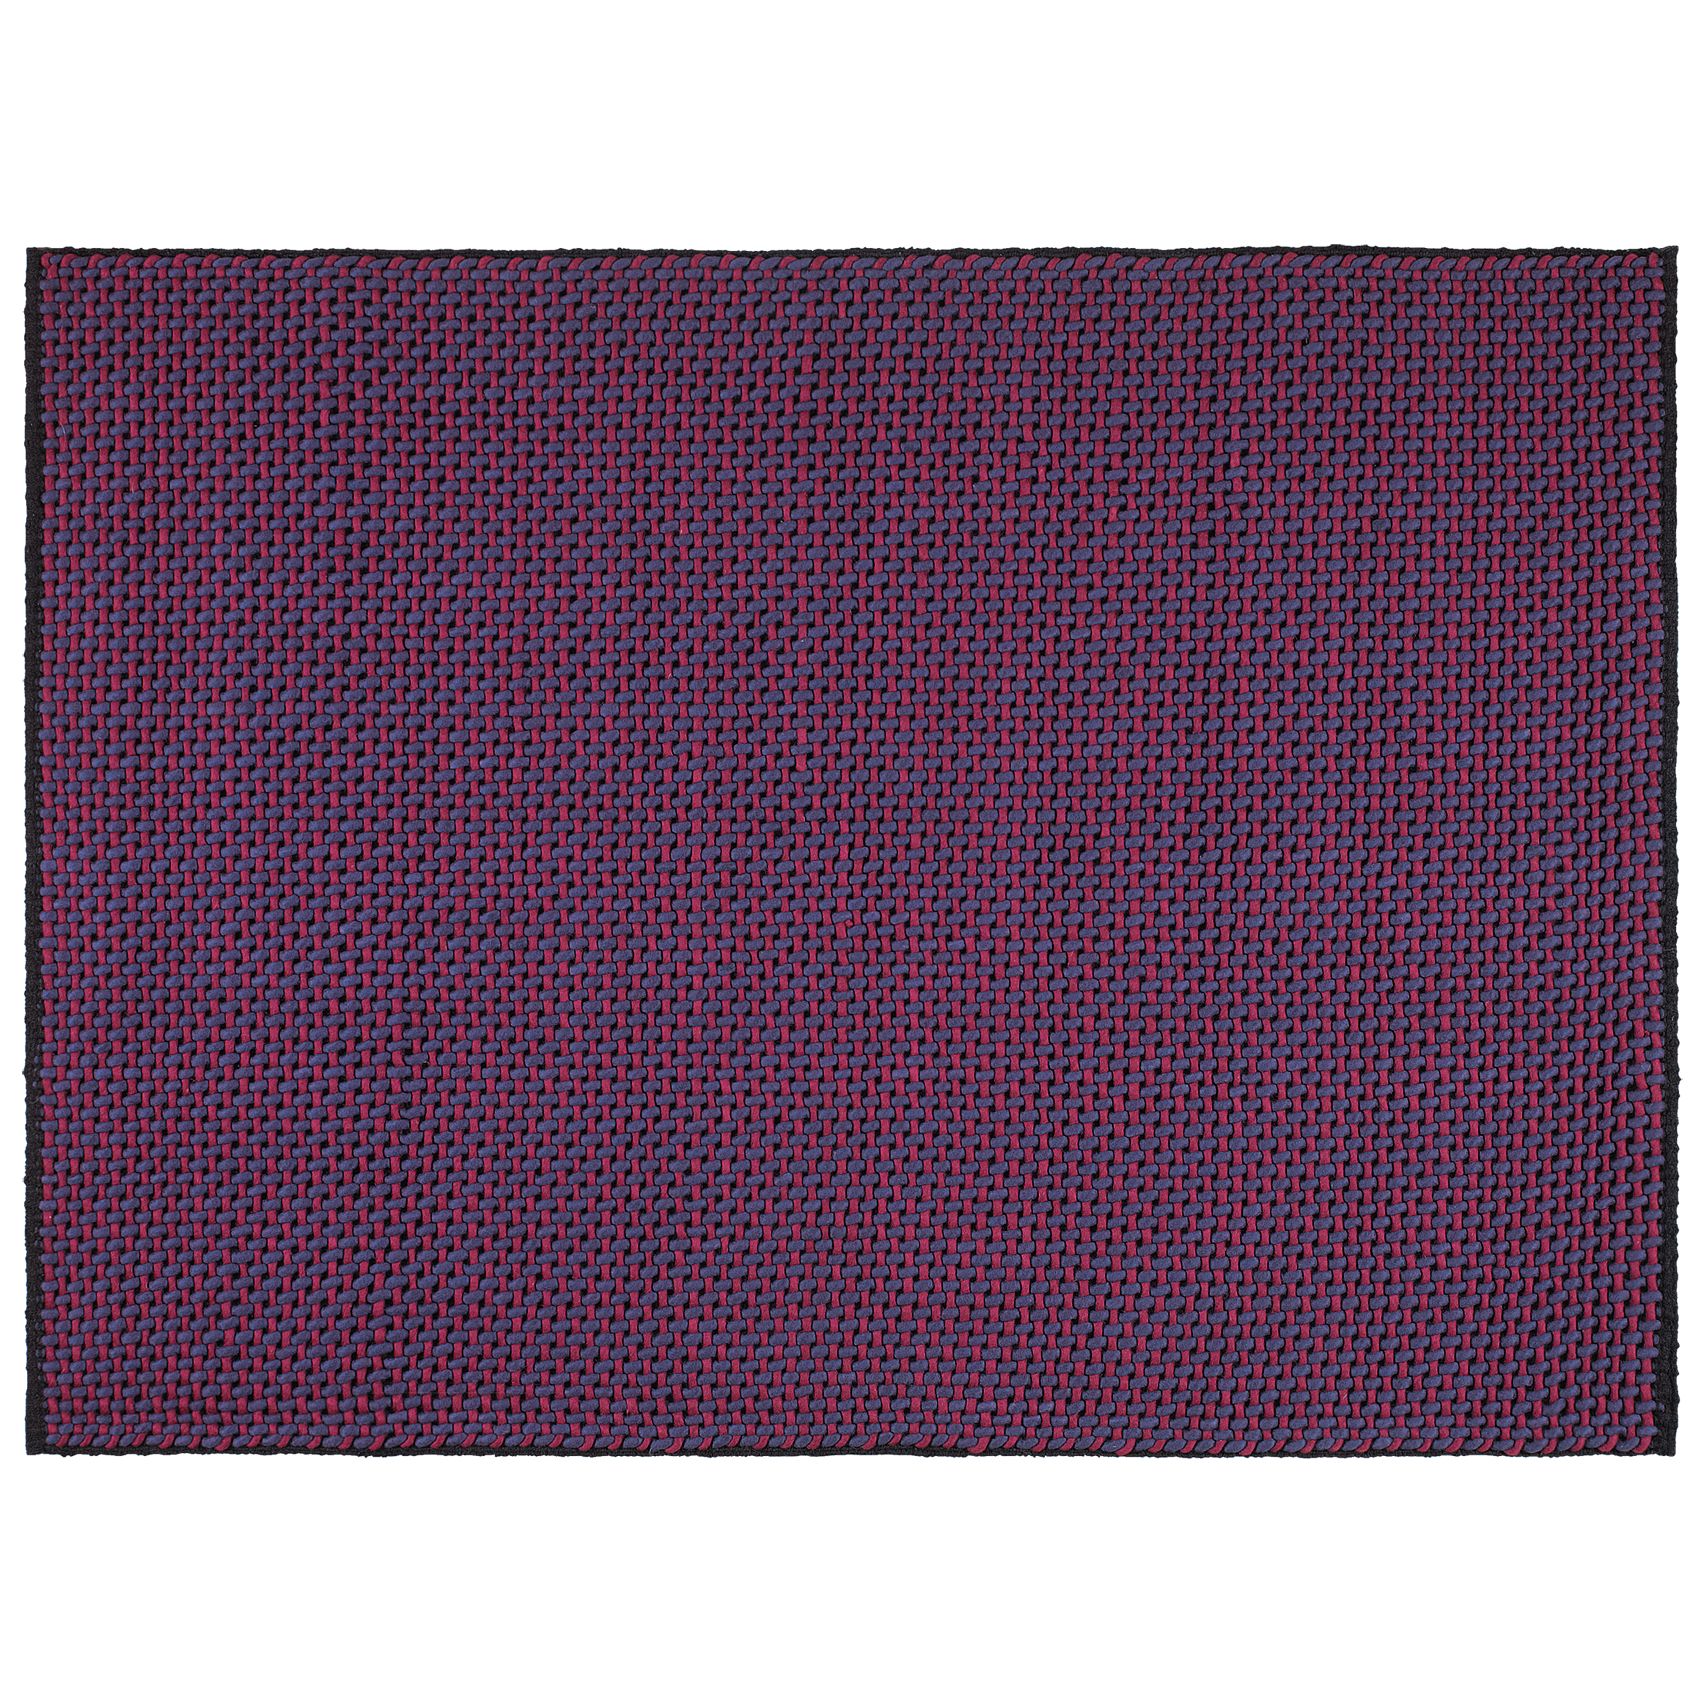 Weave Grid Rugs, Cassis at John Lewis